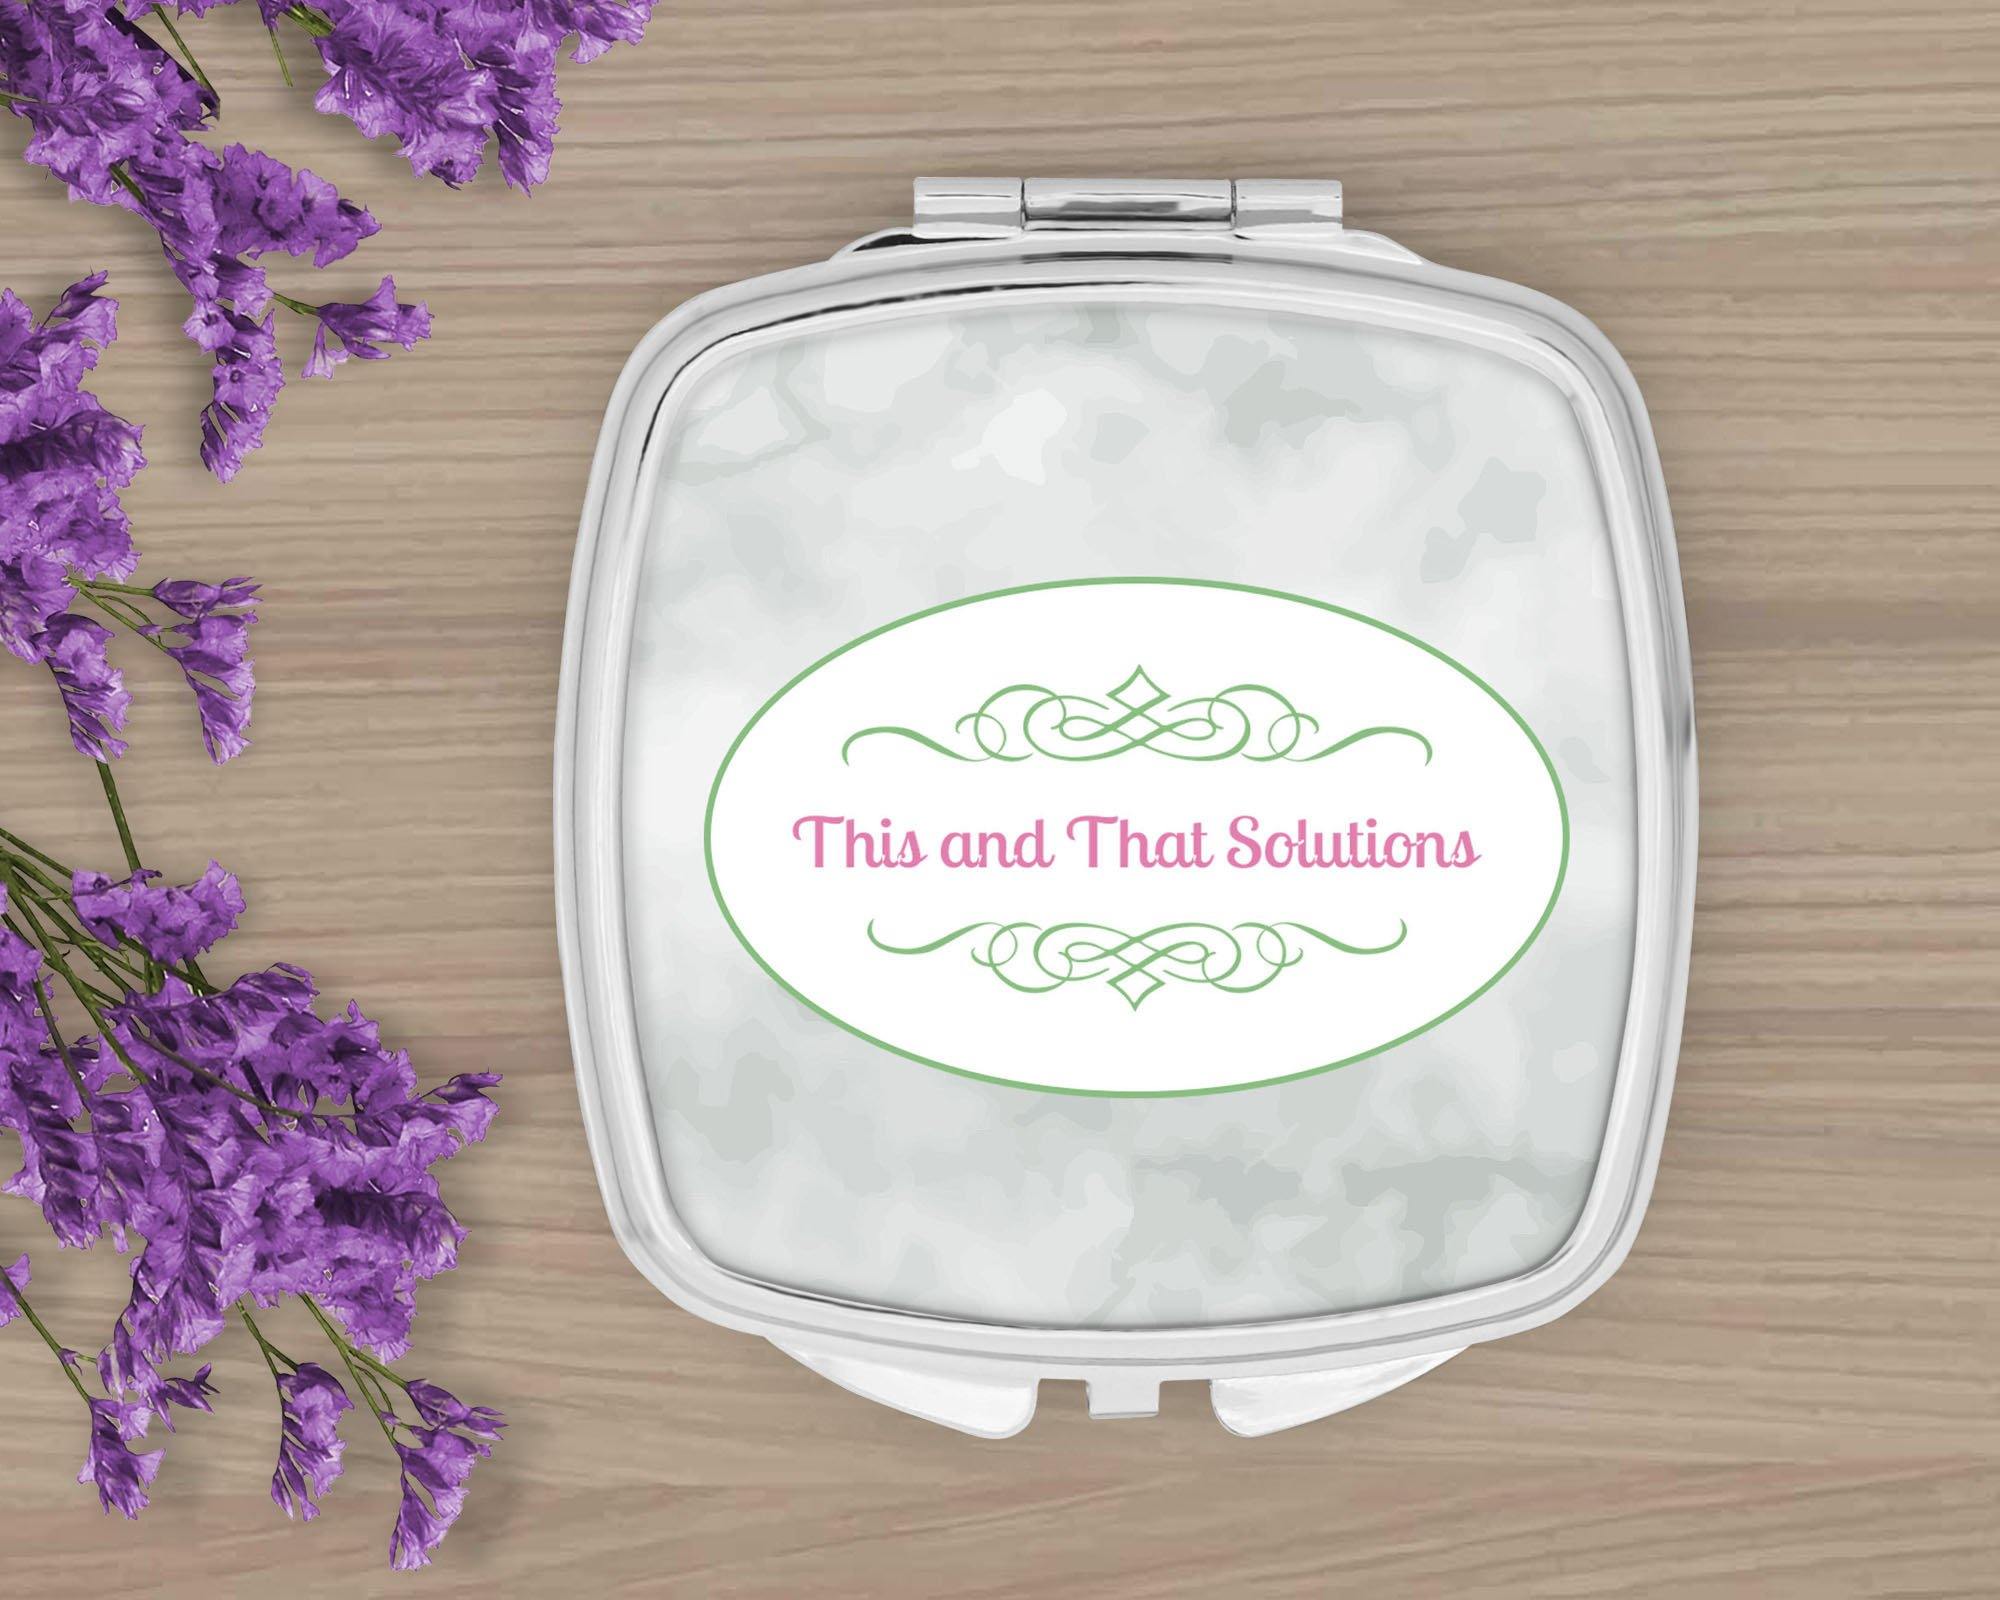 Personalized Compacts | Custom Compacts | Makeup & Cosmetics | Company Logo - This & That Solutions - Personalized Compacts | Custom Compacts | Makeup & Cosmetics | Company Logo - Personalized Gifts & Custom Home Decor